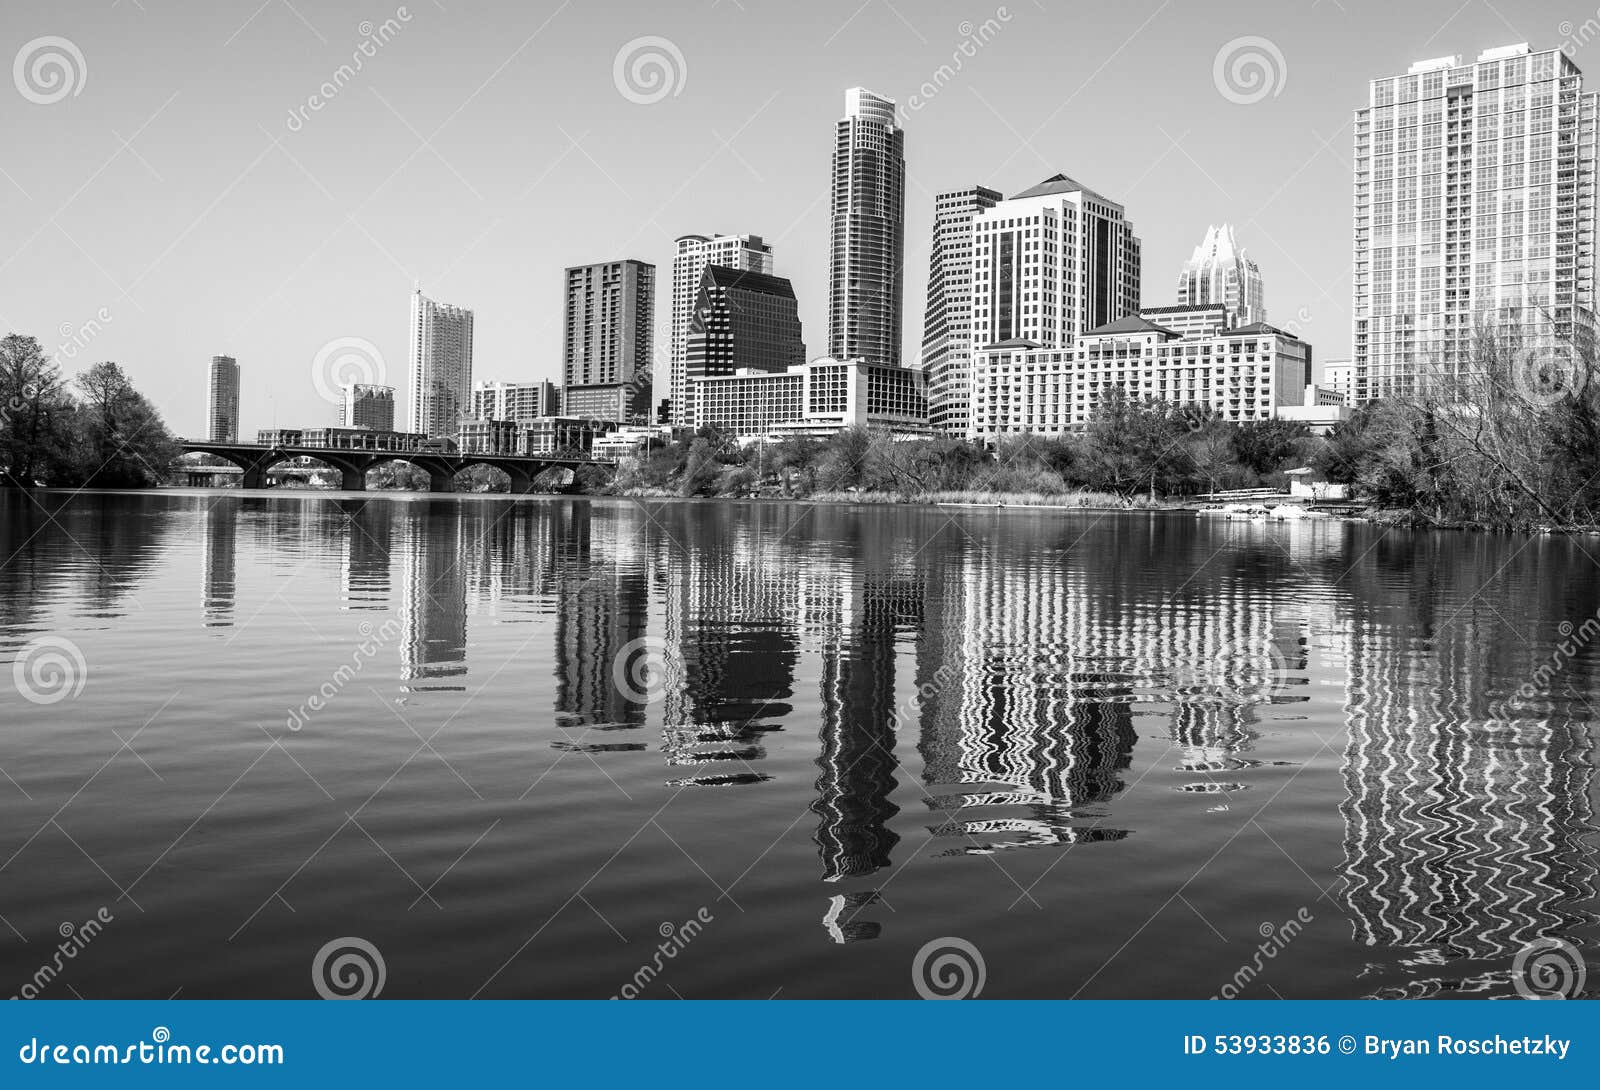 perfect middle of town lake austin skyline reflection